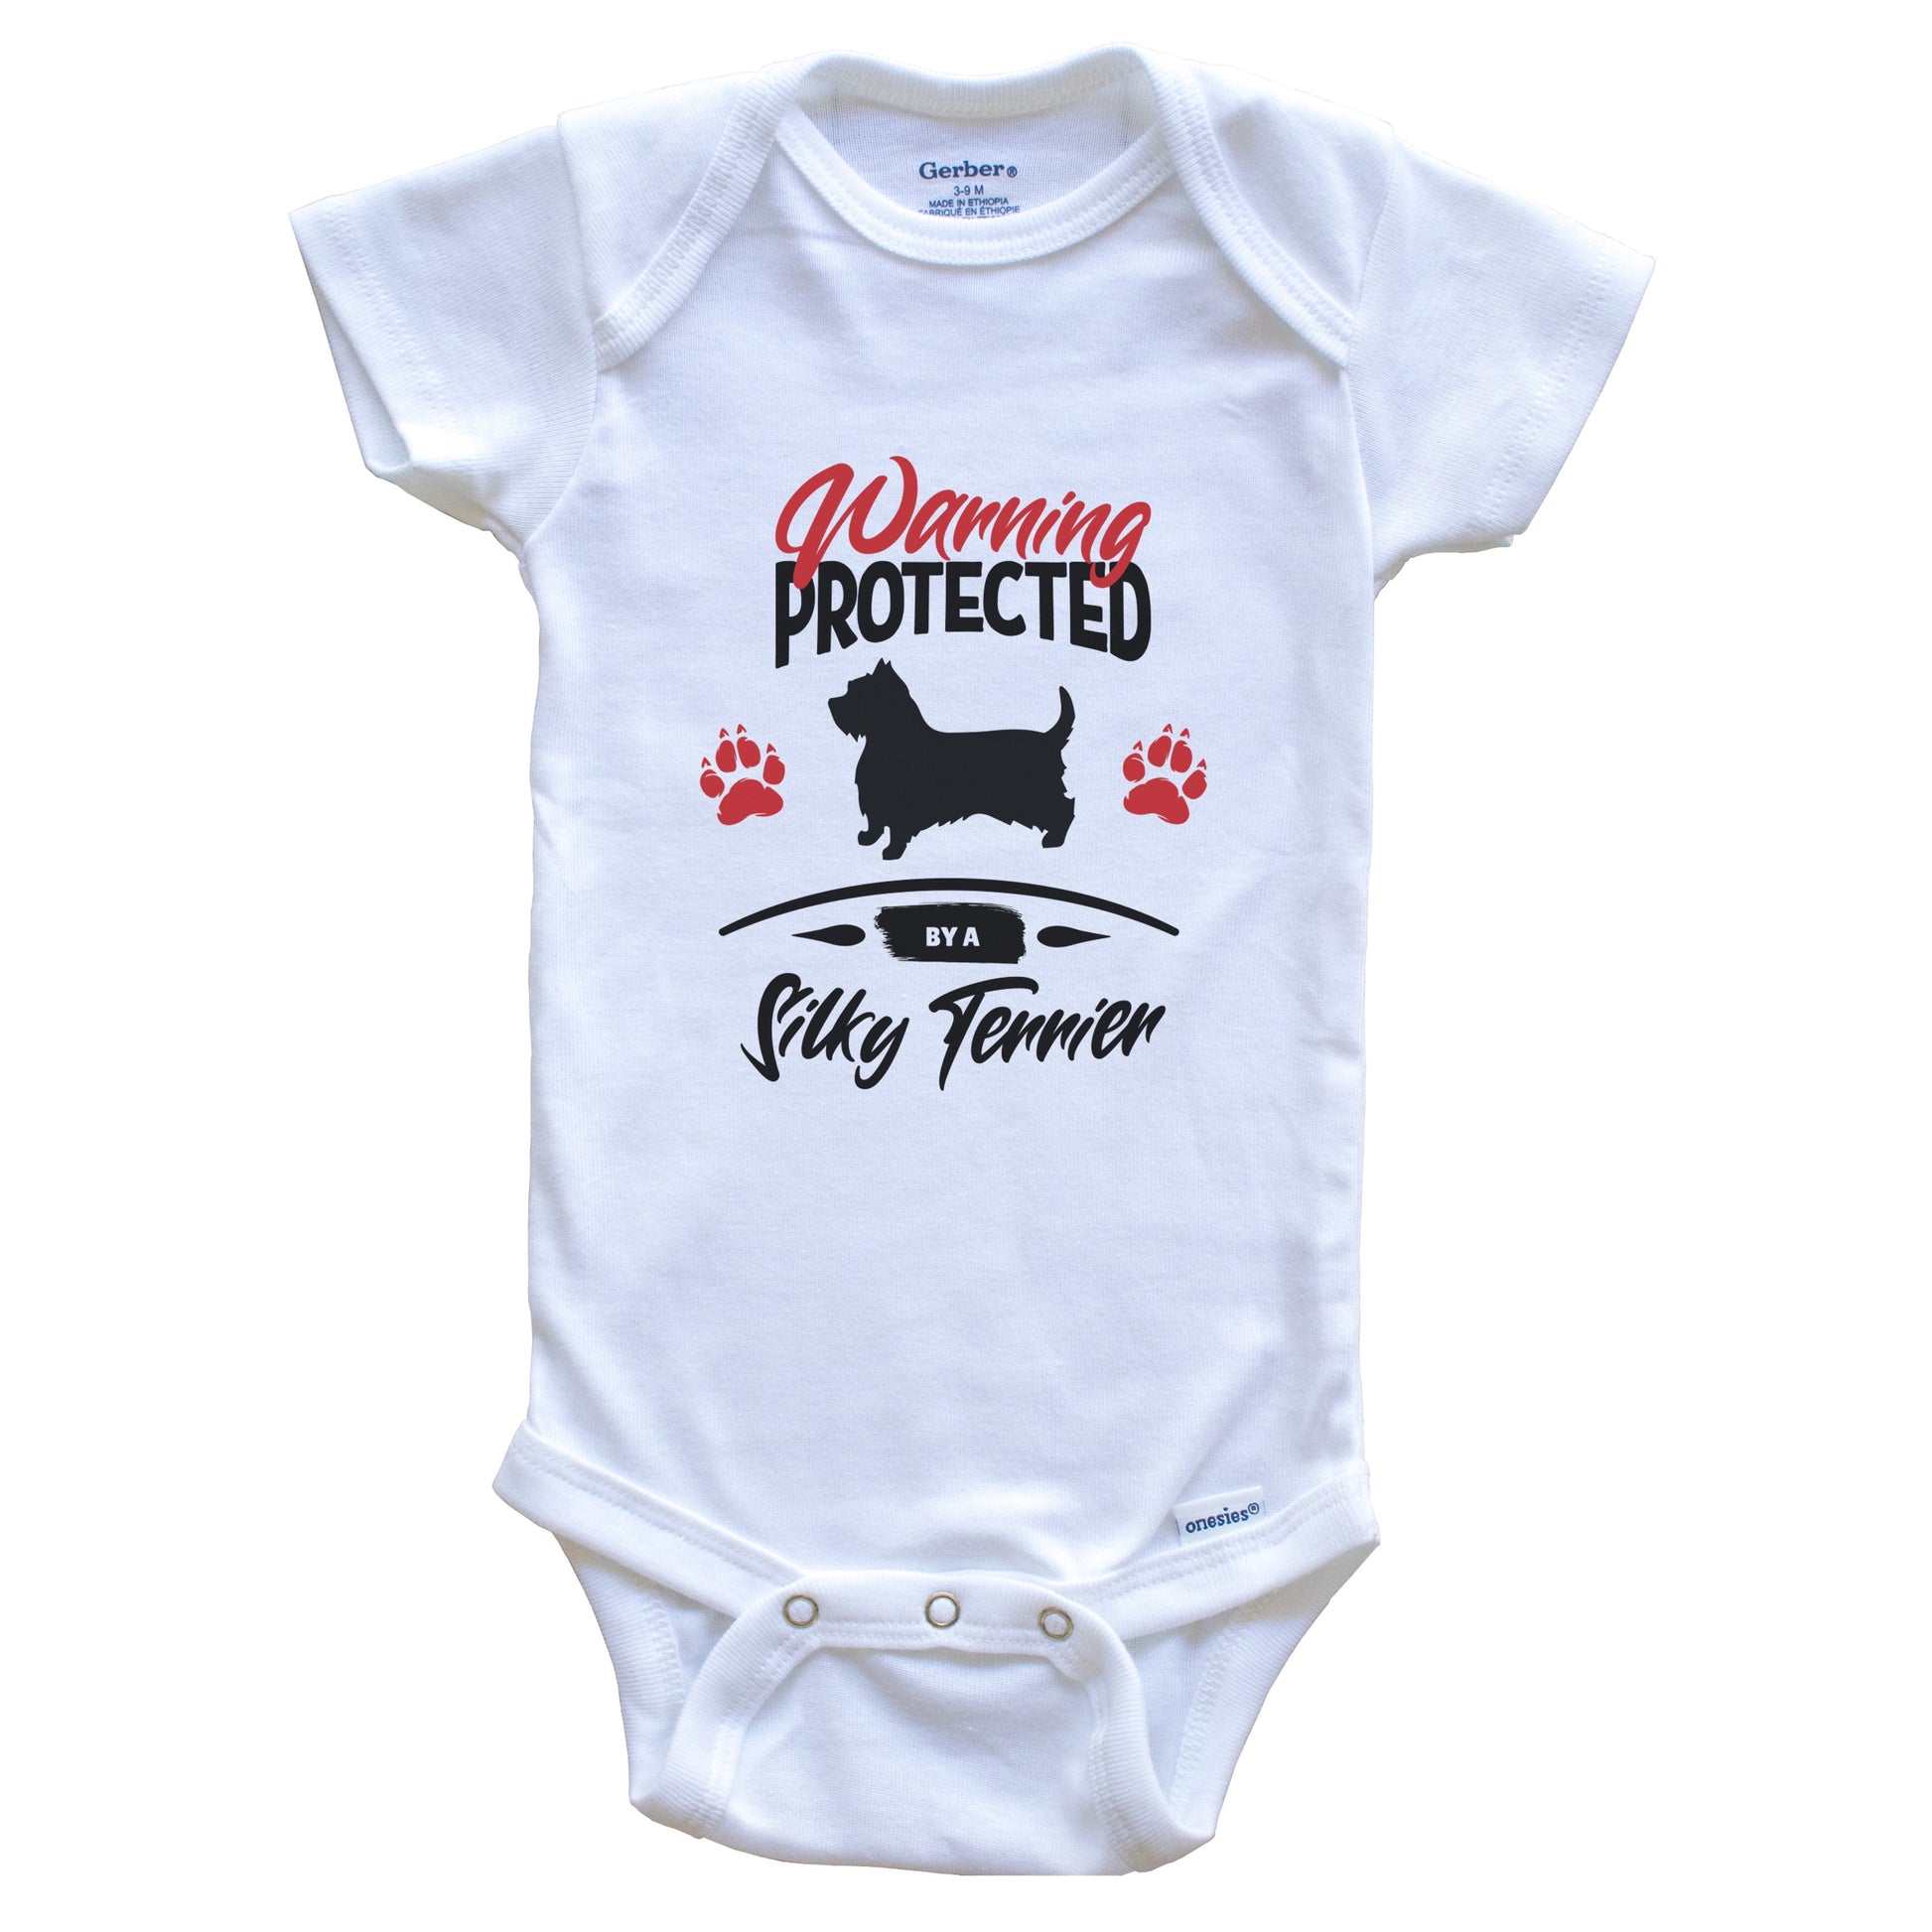 Warning Protected By A Silky Terrier Funny Dog Owner Baby Bodysuit